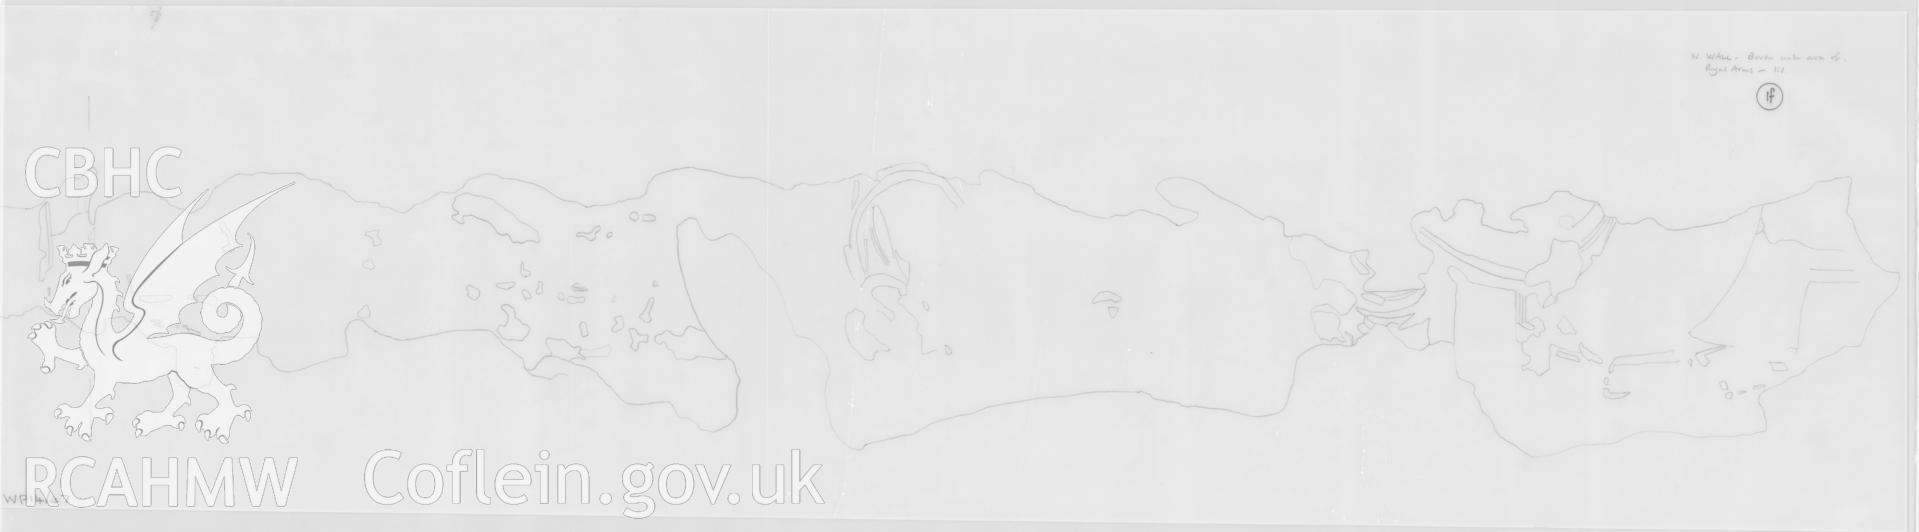 Provisional sketch on tracing paper showing the wall painting on the north wall, in St Teilo's Church, Llandeilo Talybont, produced by D.J. Roberts and A.J. Parkinson, undated.